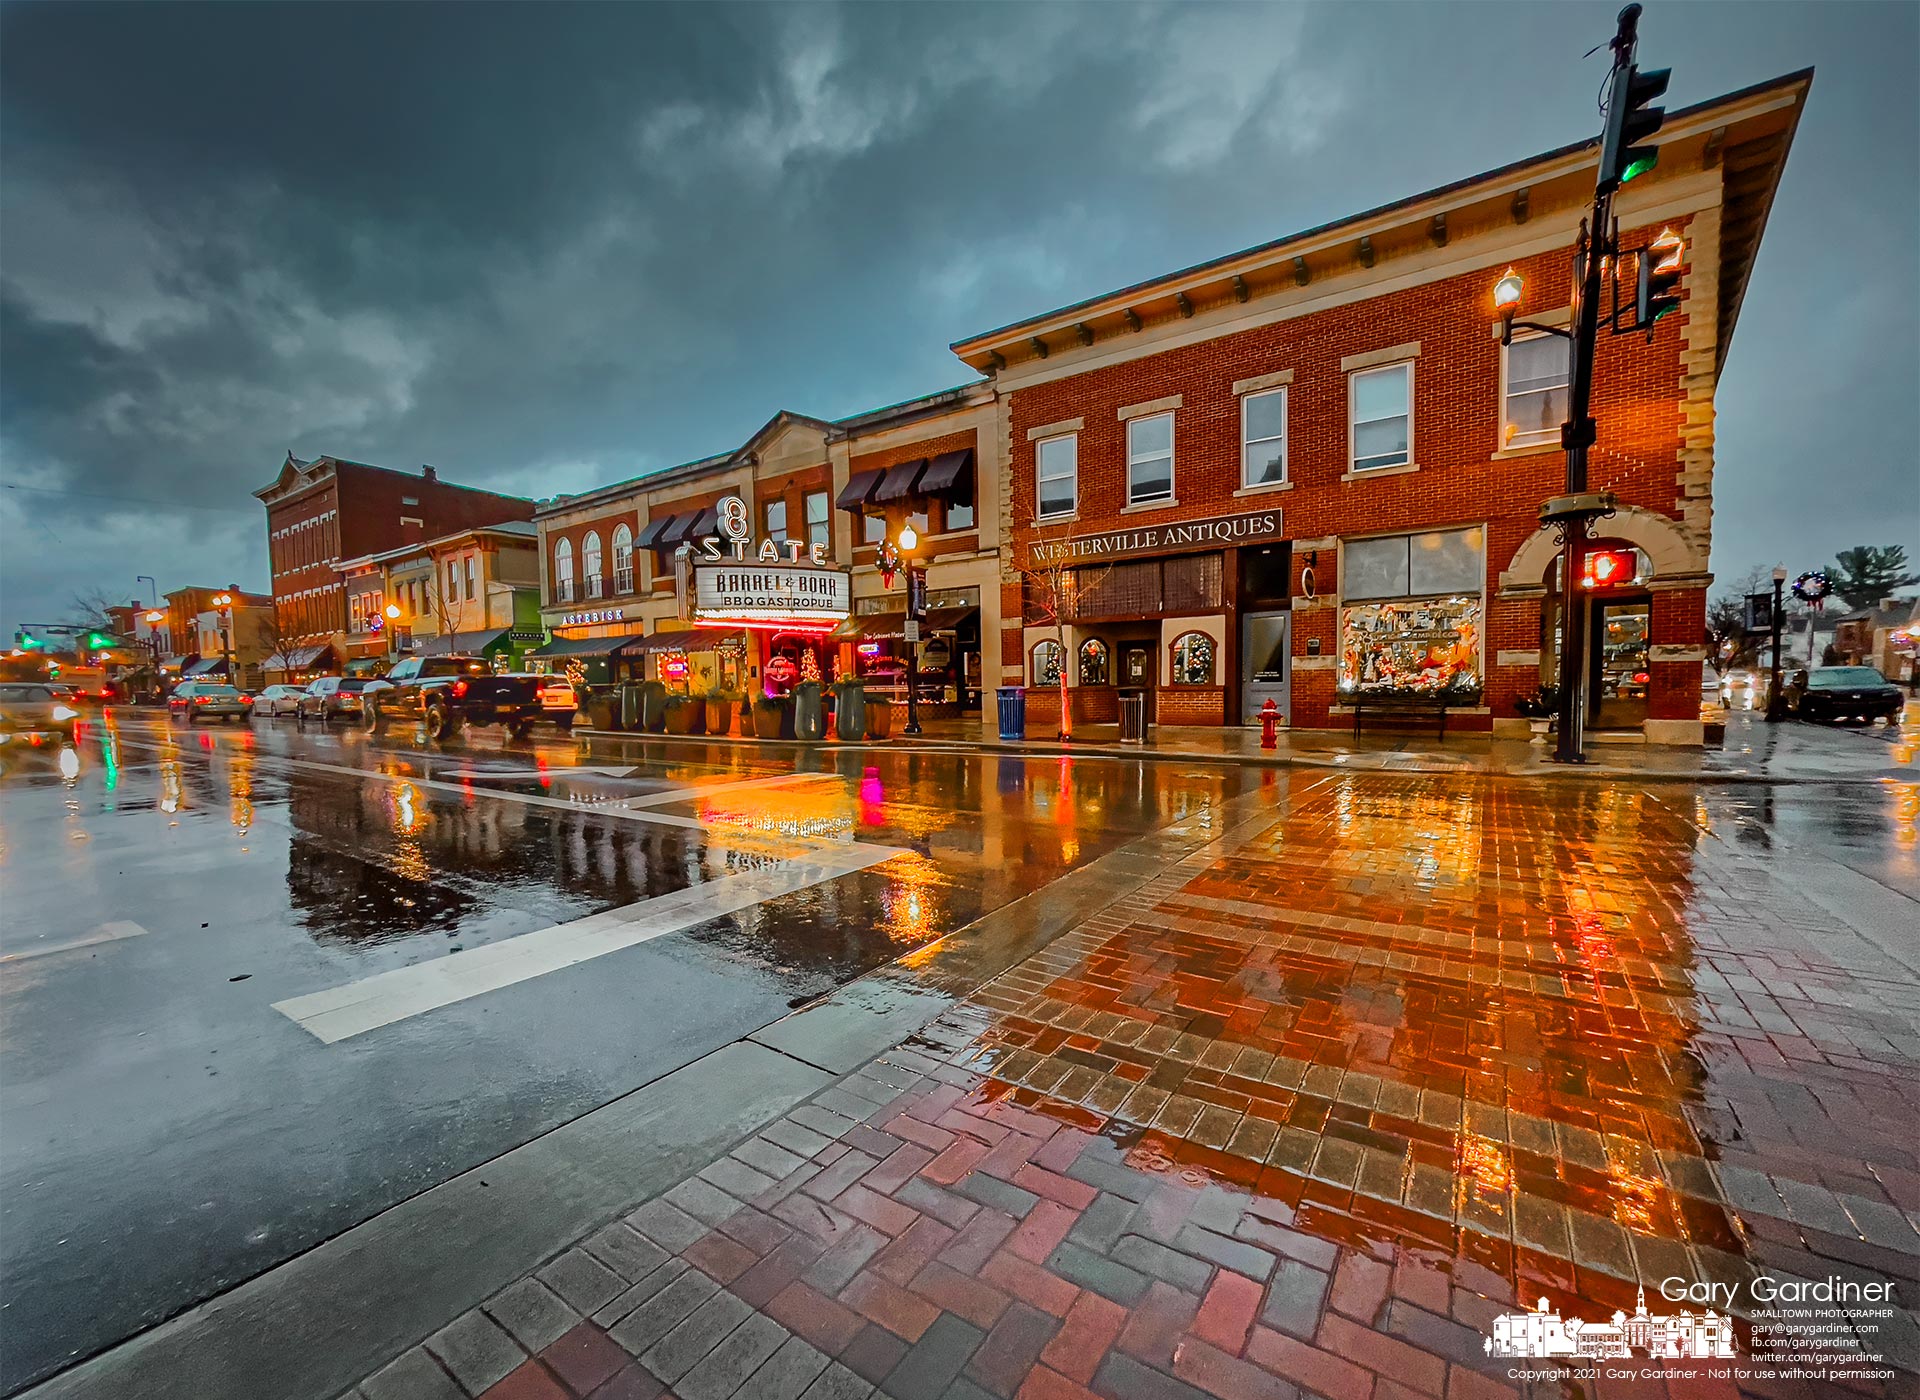 The buildings and lights of Uptown Westerville are reflected in rain-covered streets after a near day-long rainstorm. My Final Photo for Dec. 16, 2021.